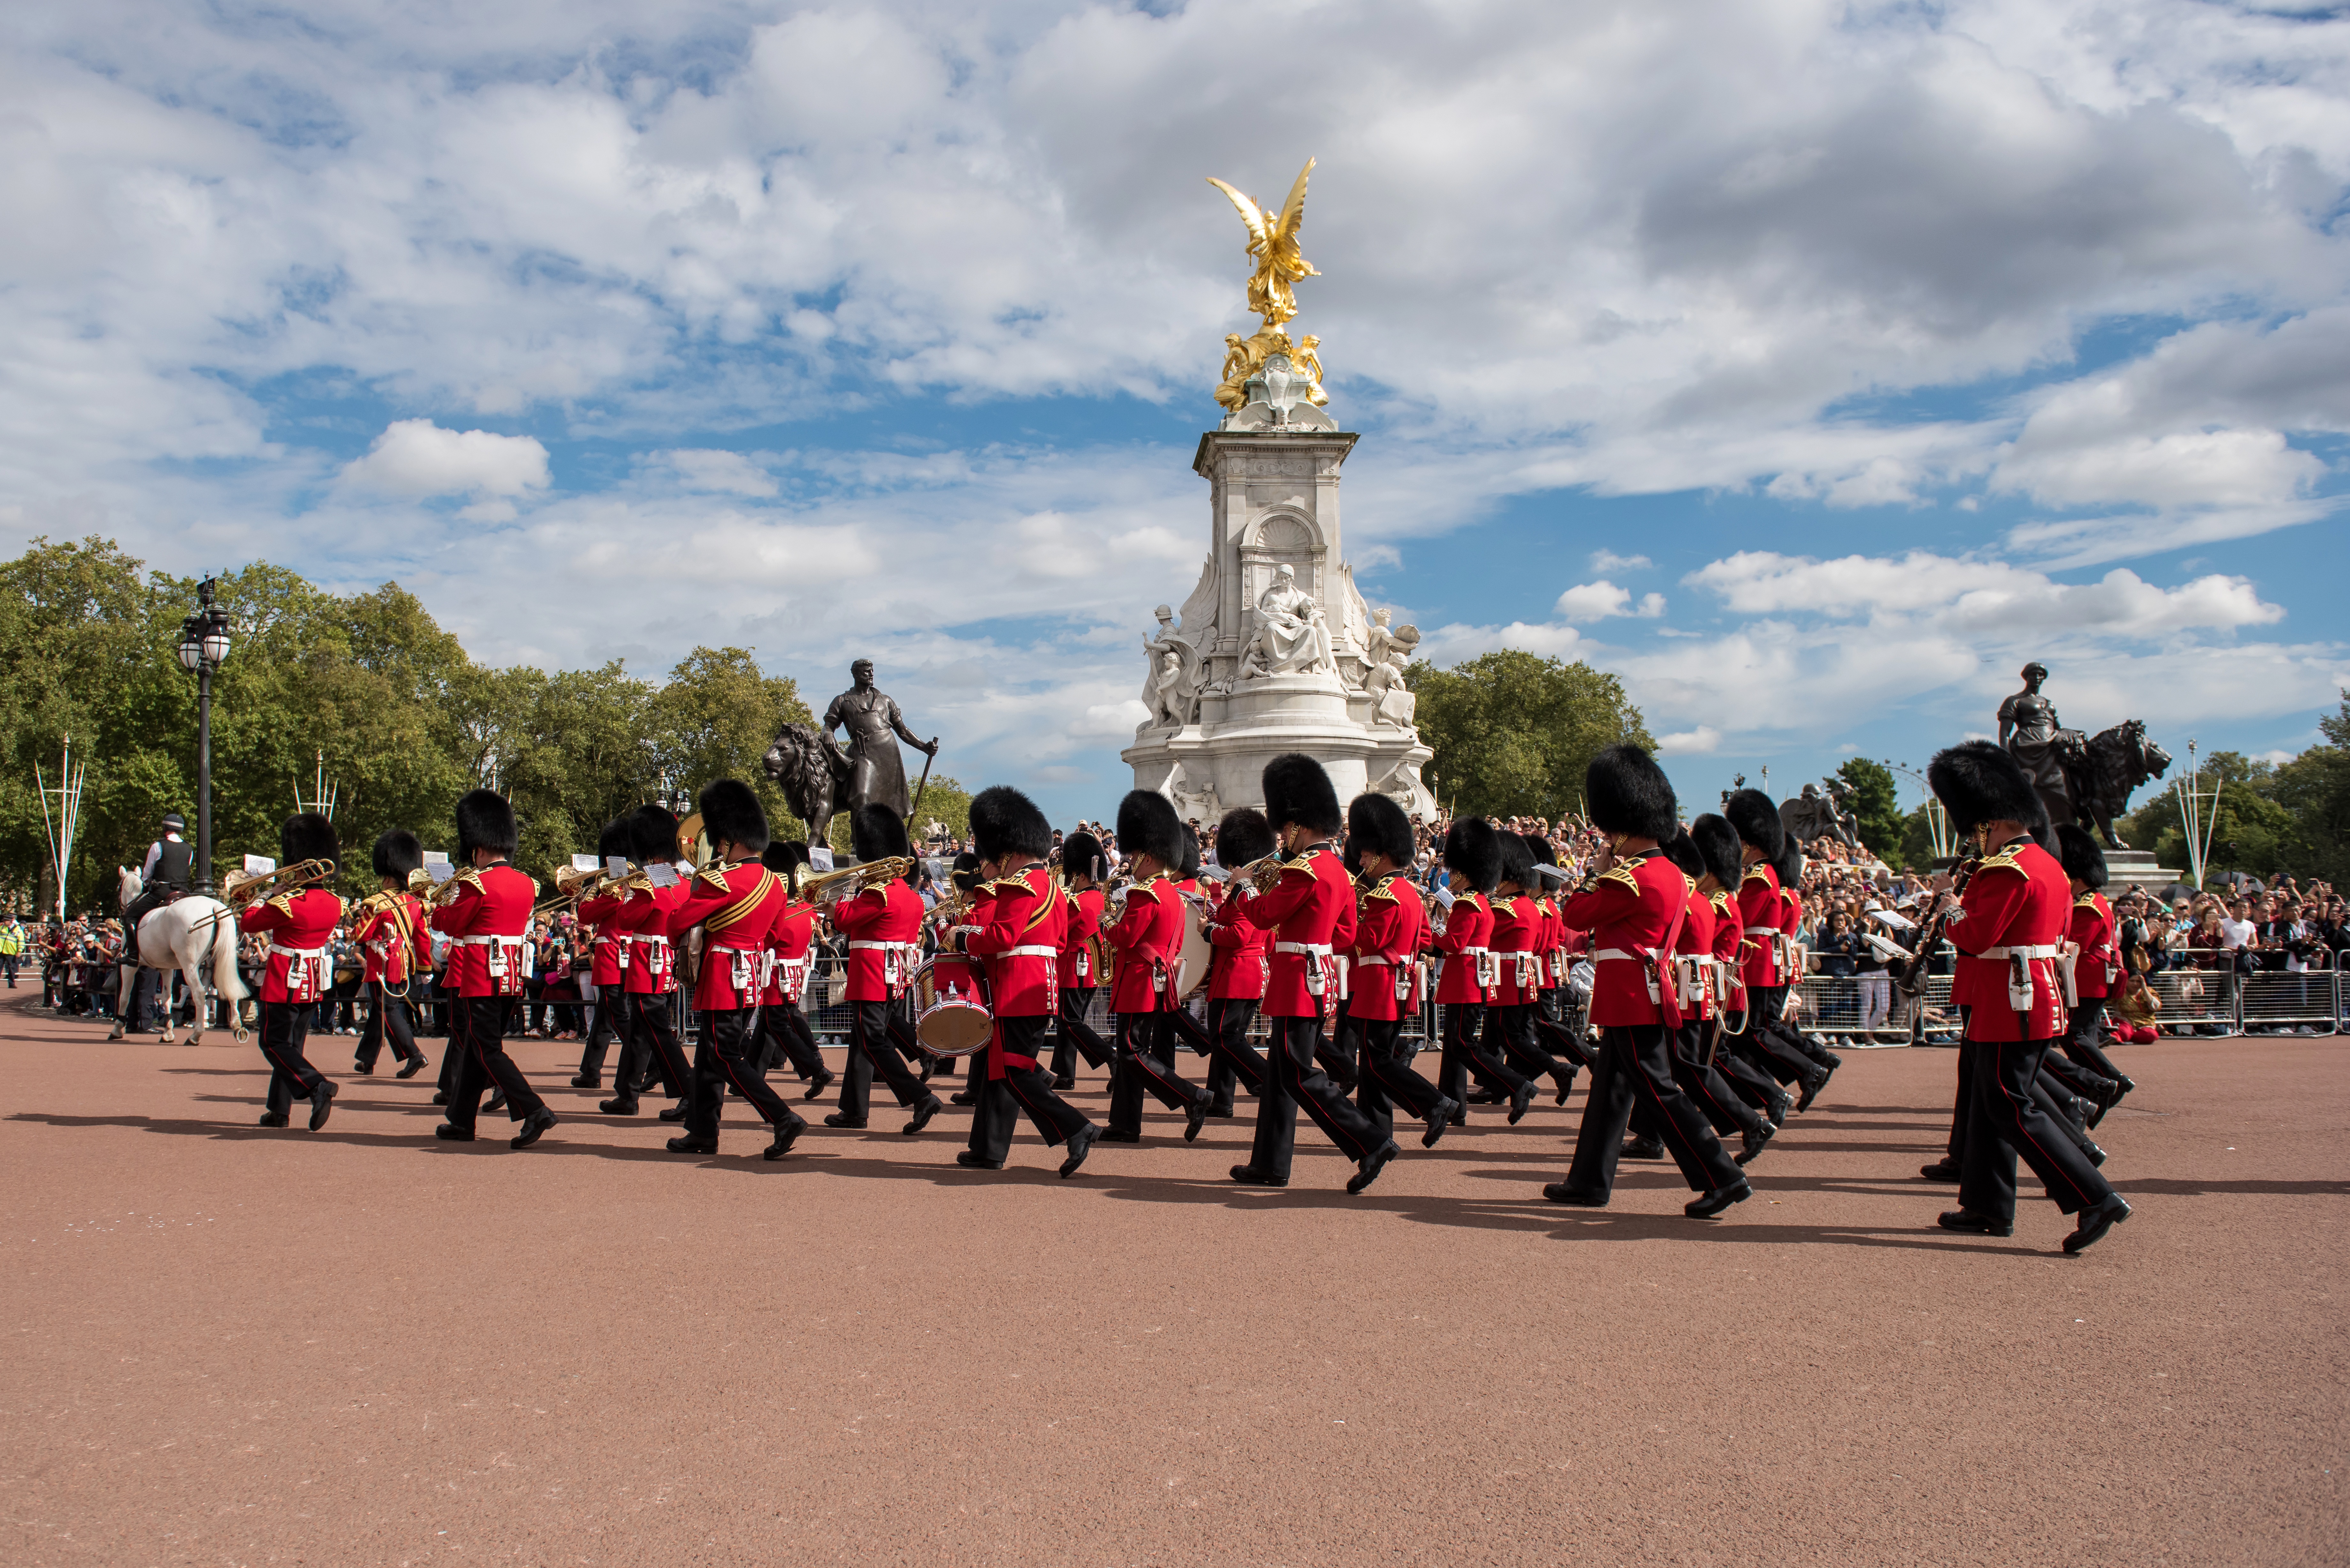 iStock-645735656_changing guards.jpg